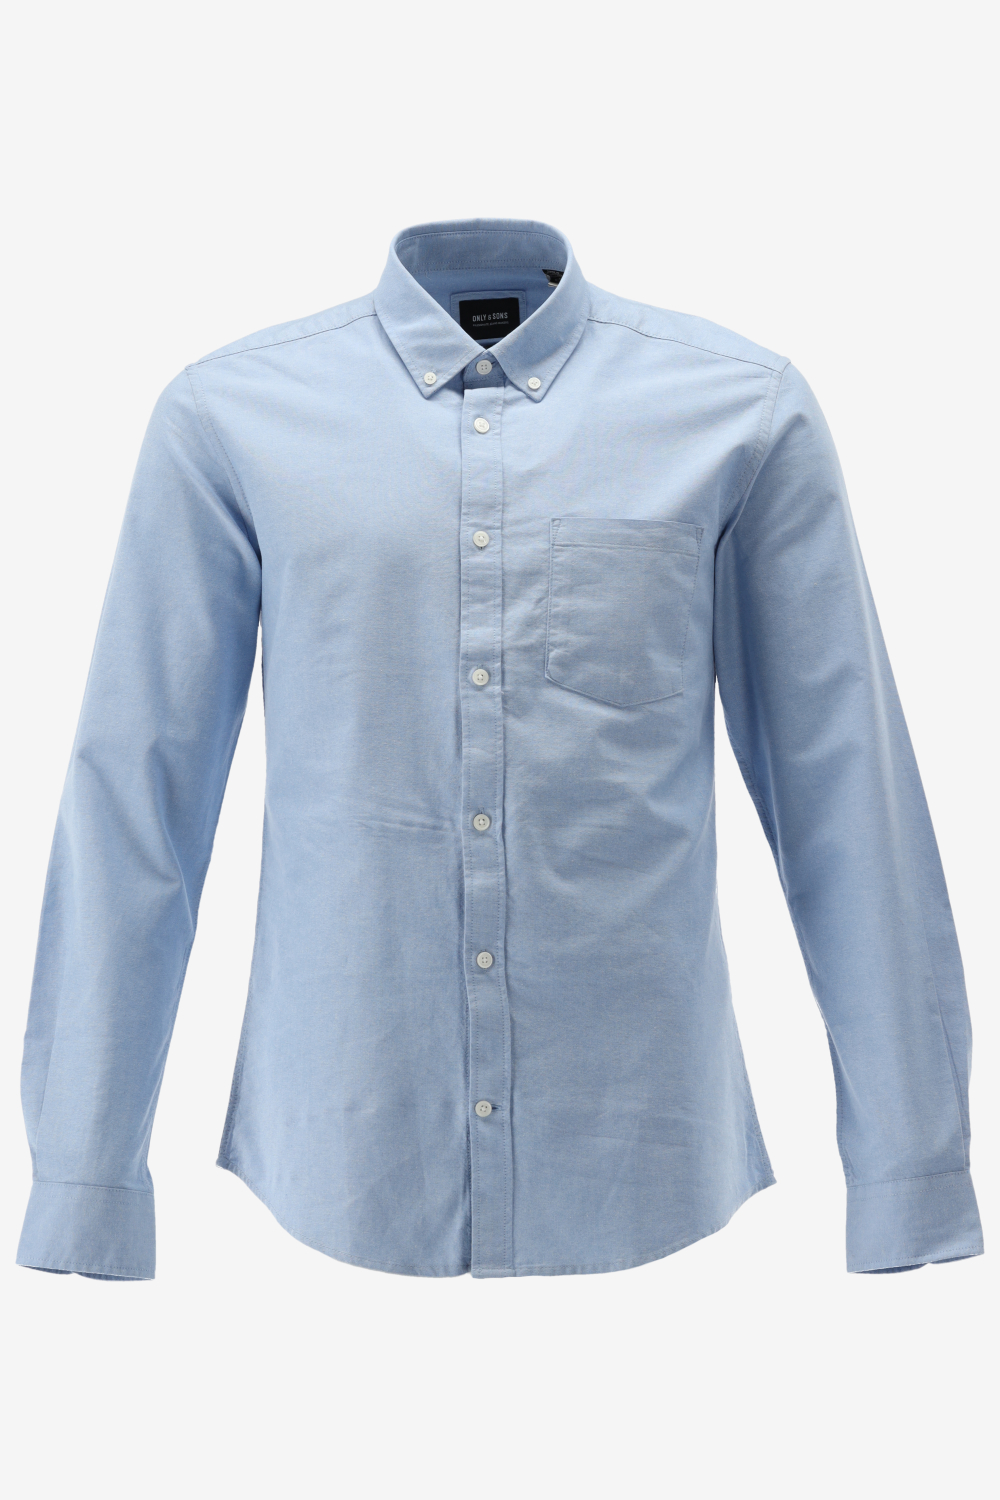 Only & Sons-Overhemd-Cashmere blue-Onsneil-XL